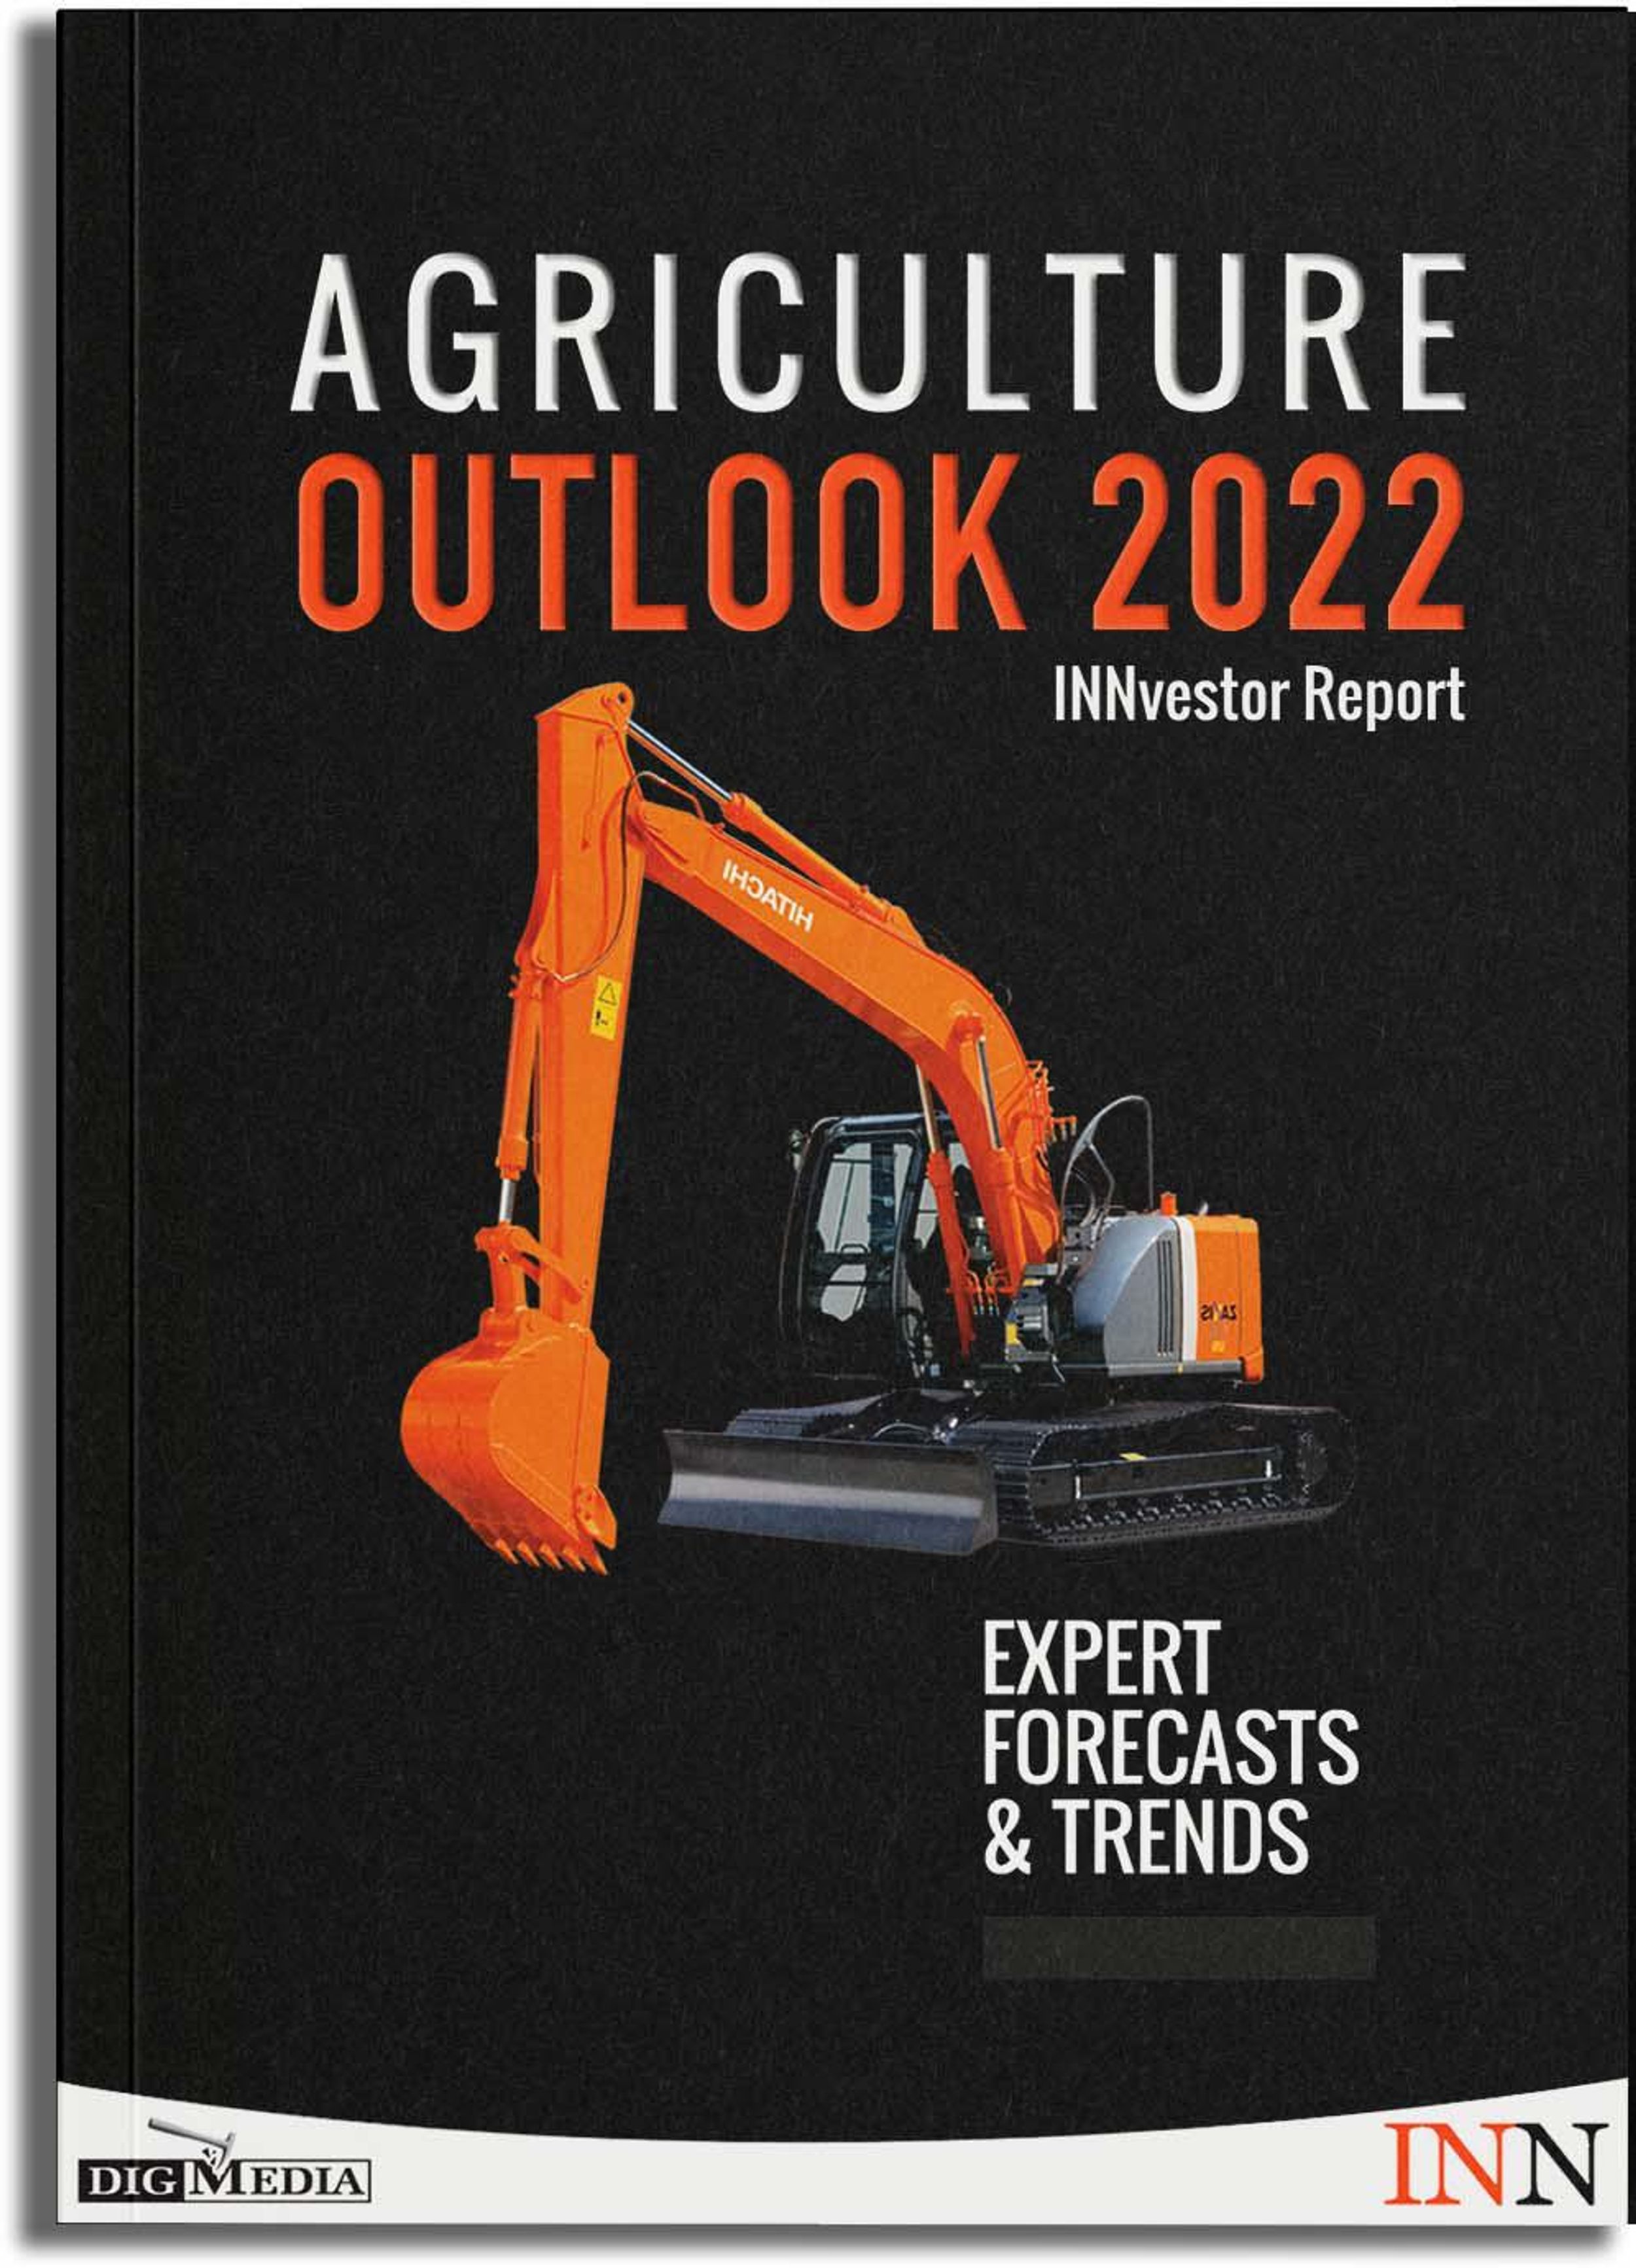 NEW! Download Your FREE 2022 Agriculture Outlook Report.